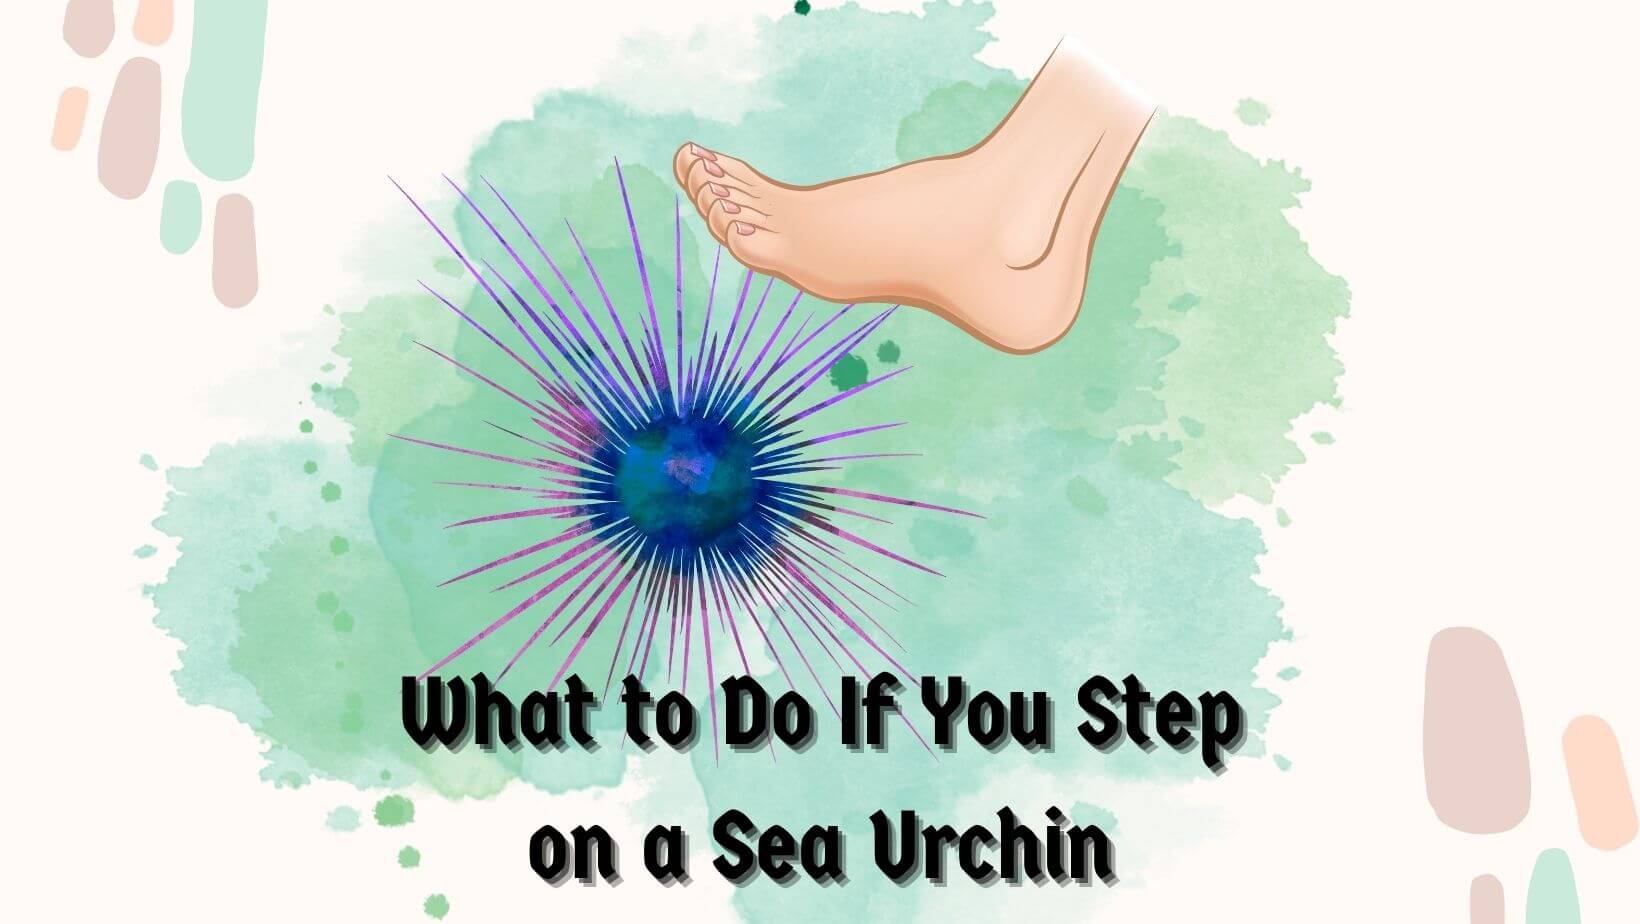 What to Do If You Step on a Sea Urchin